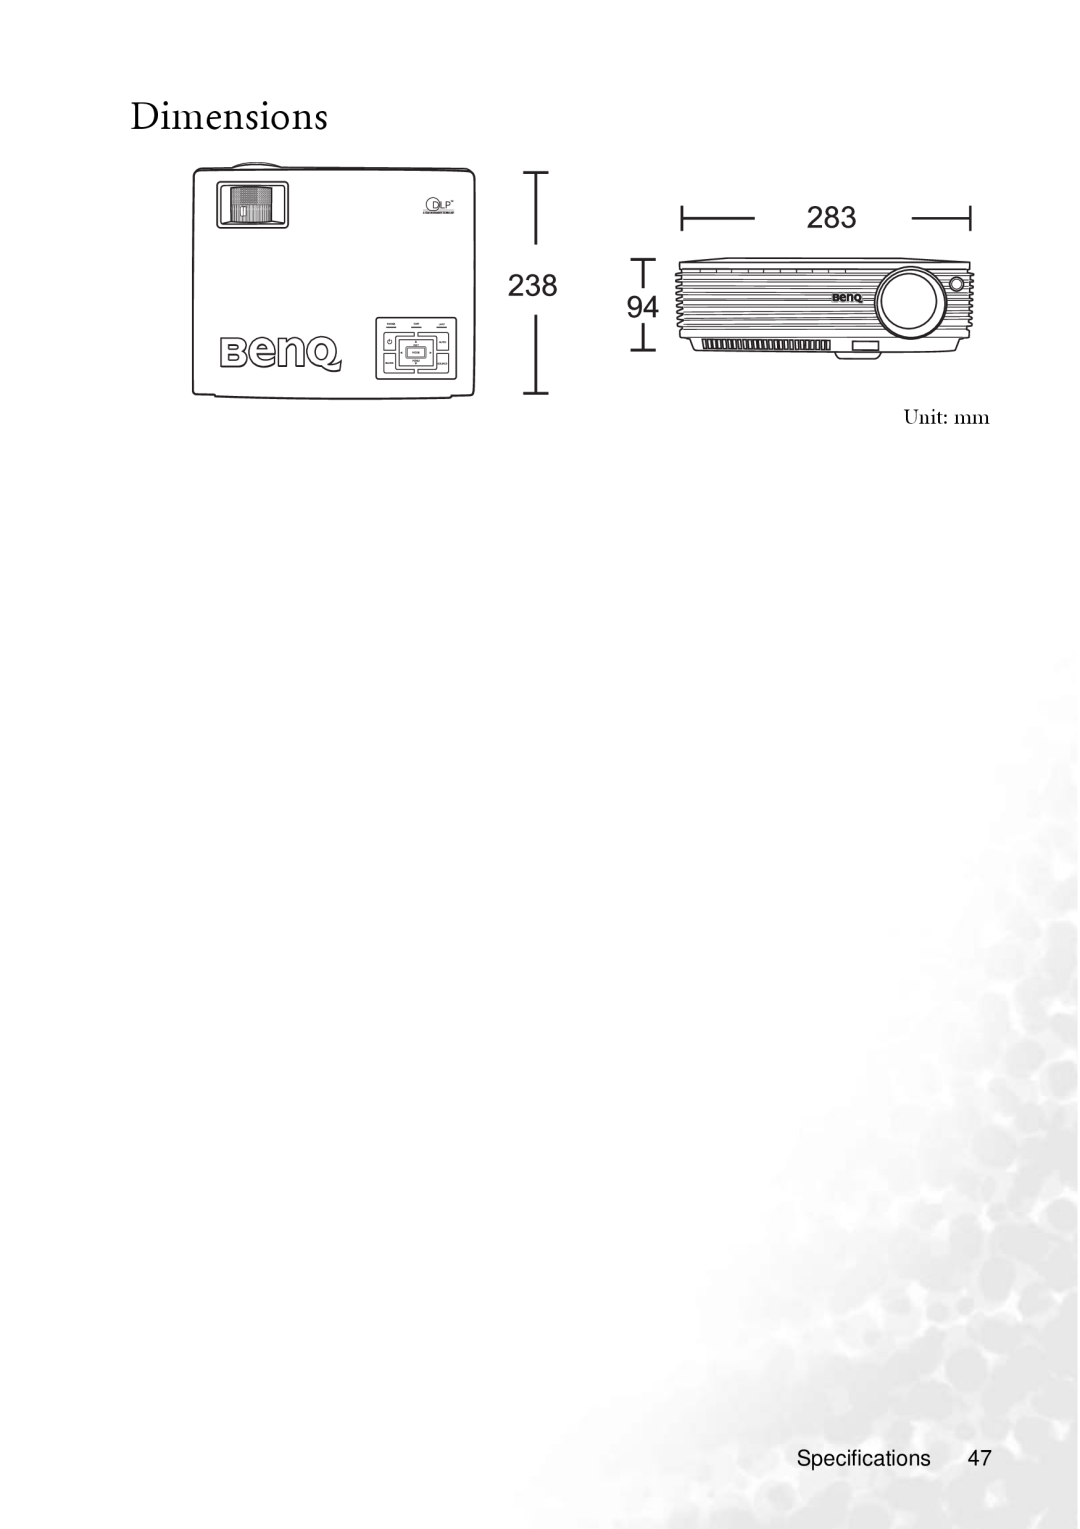 BenQ MP610 user manual Dimensions, Unit mm, Specifications 